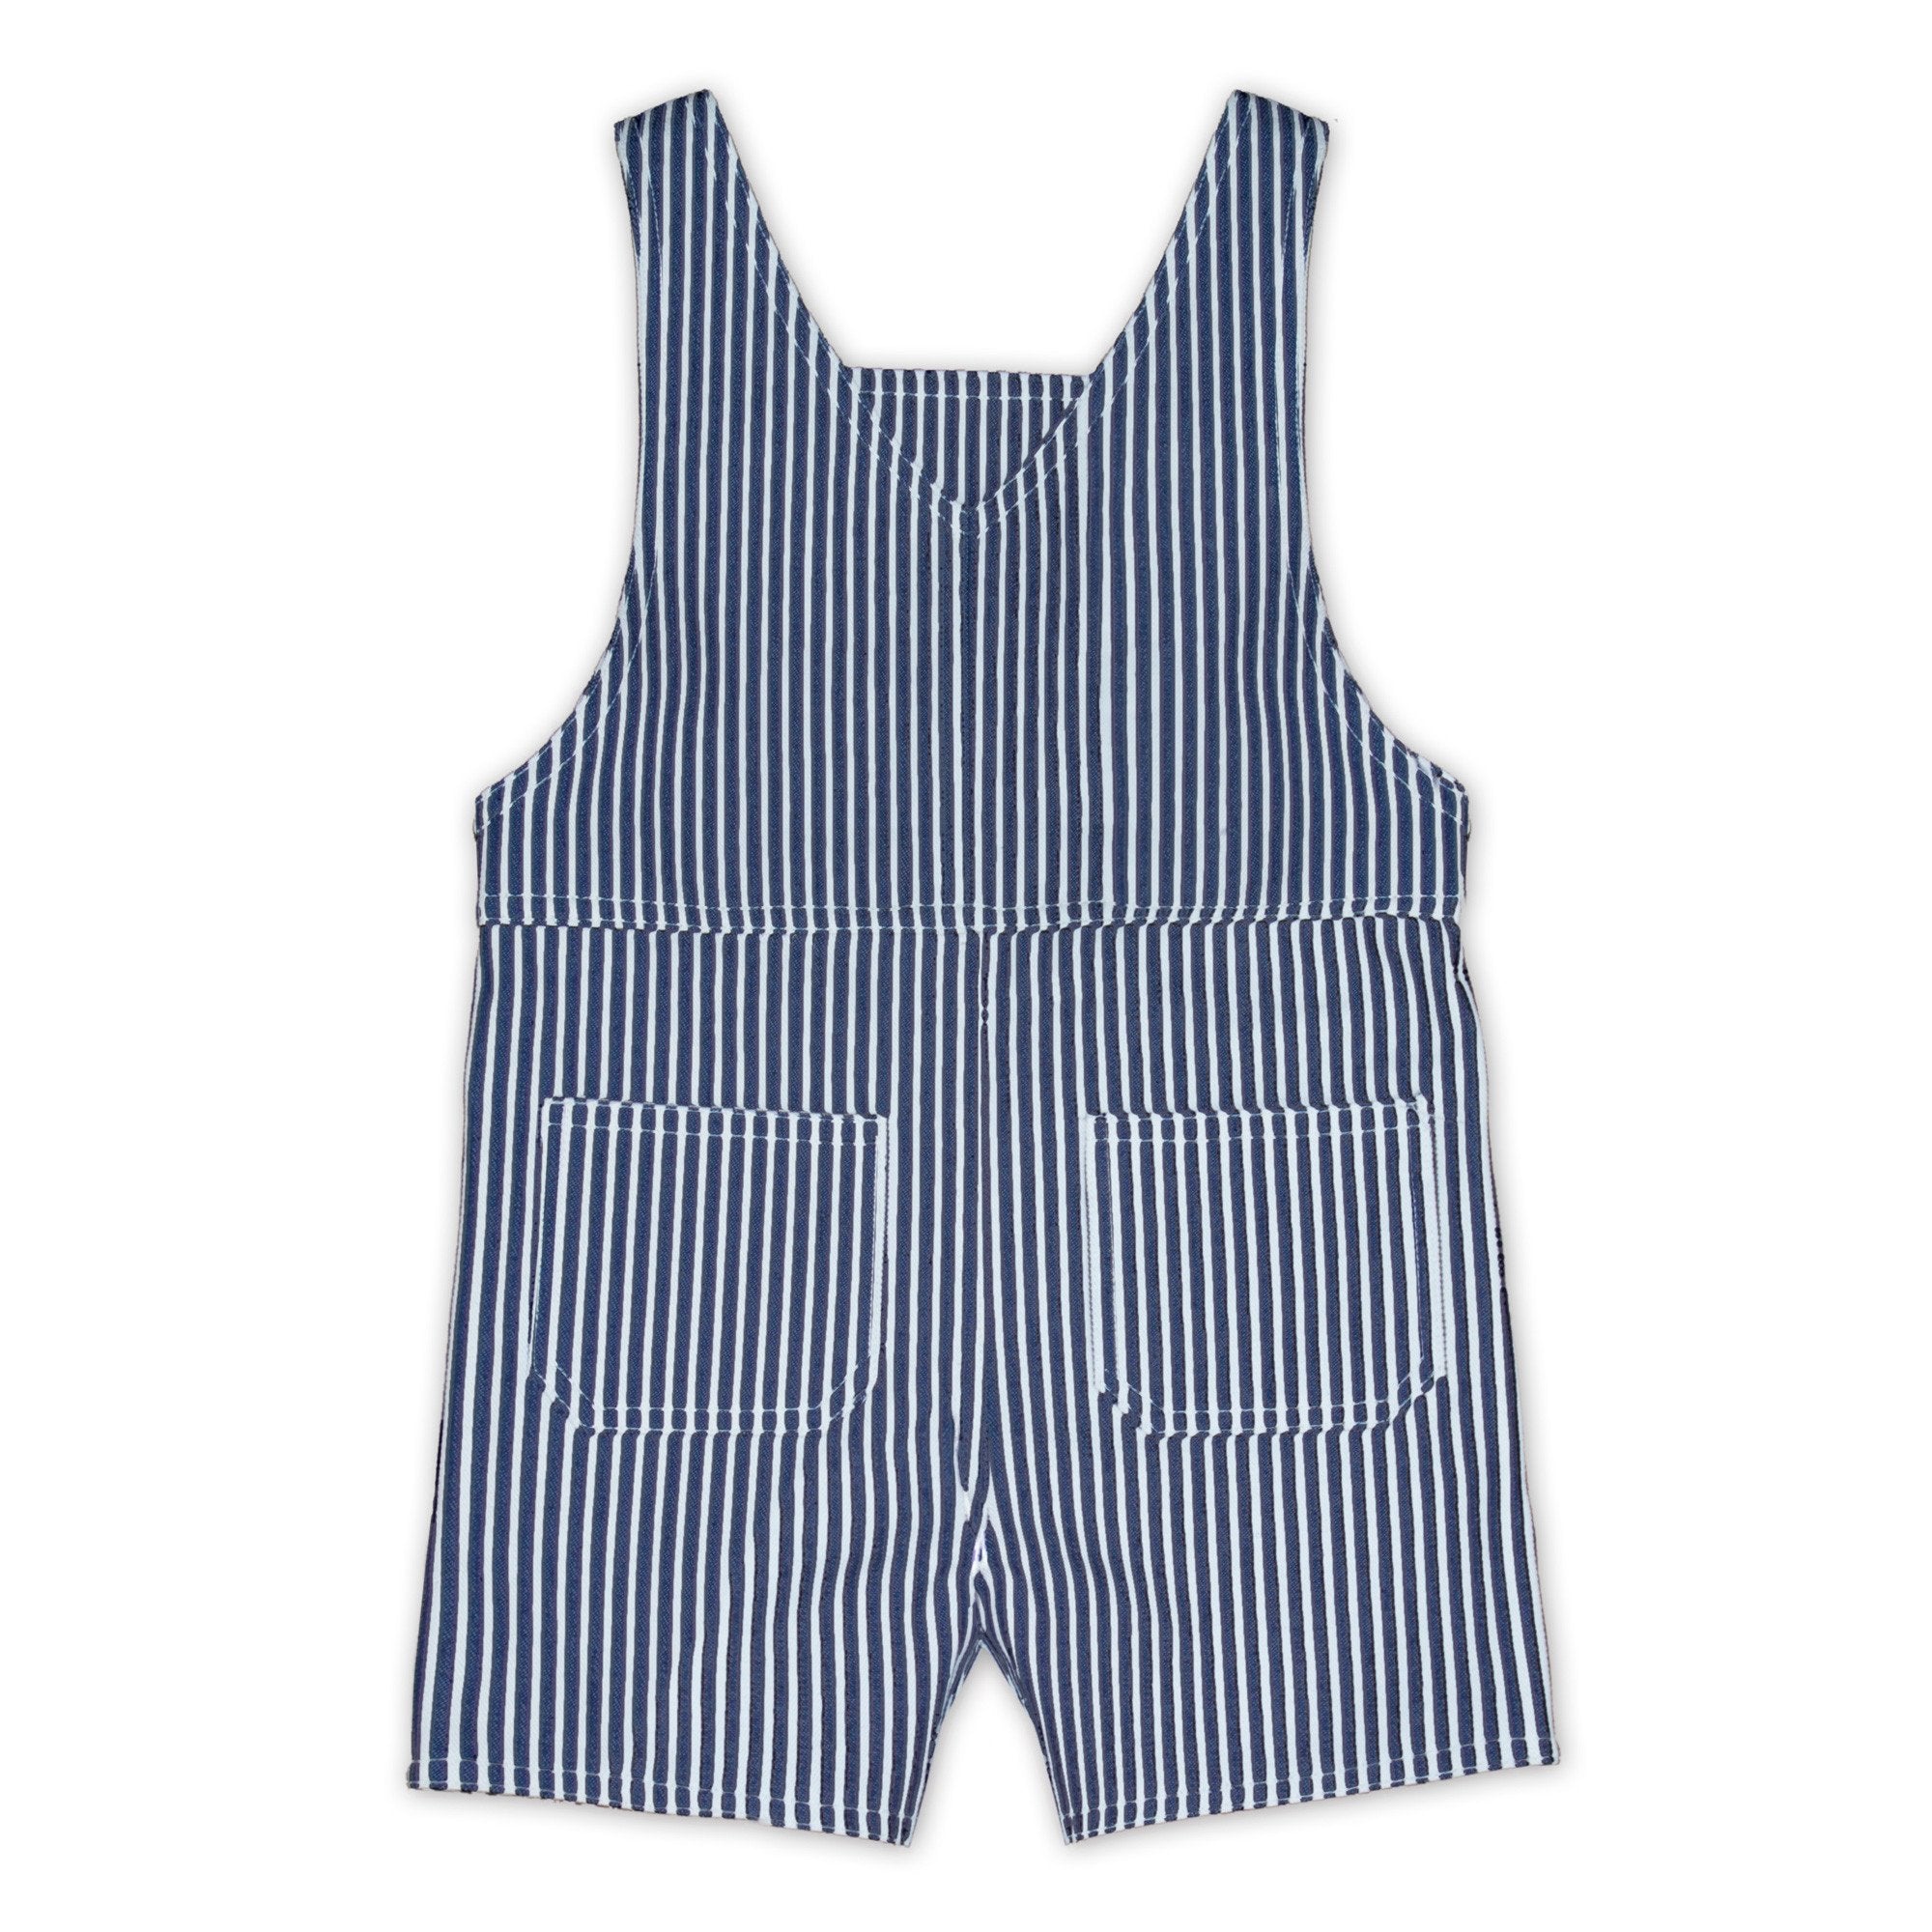 NAVY AND WHITE STRIPE DENIM OVERALLS | Cou Cou Baby